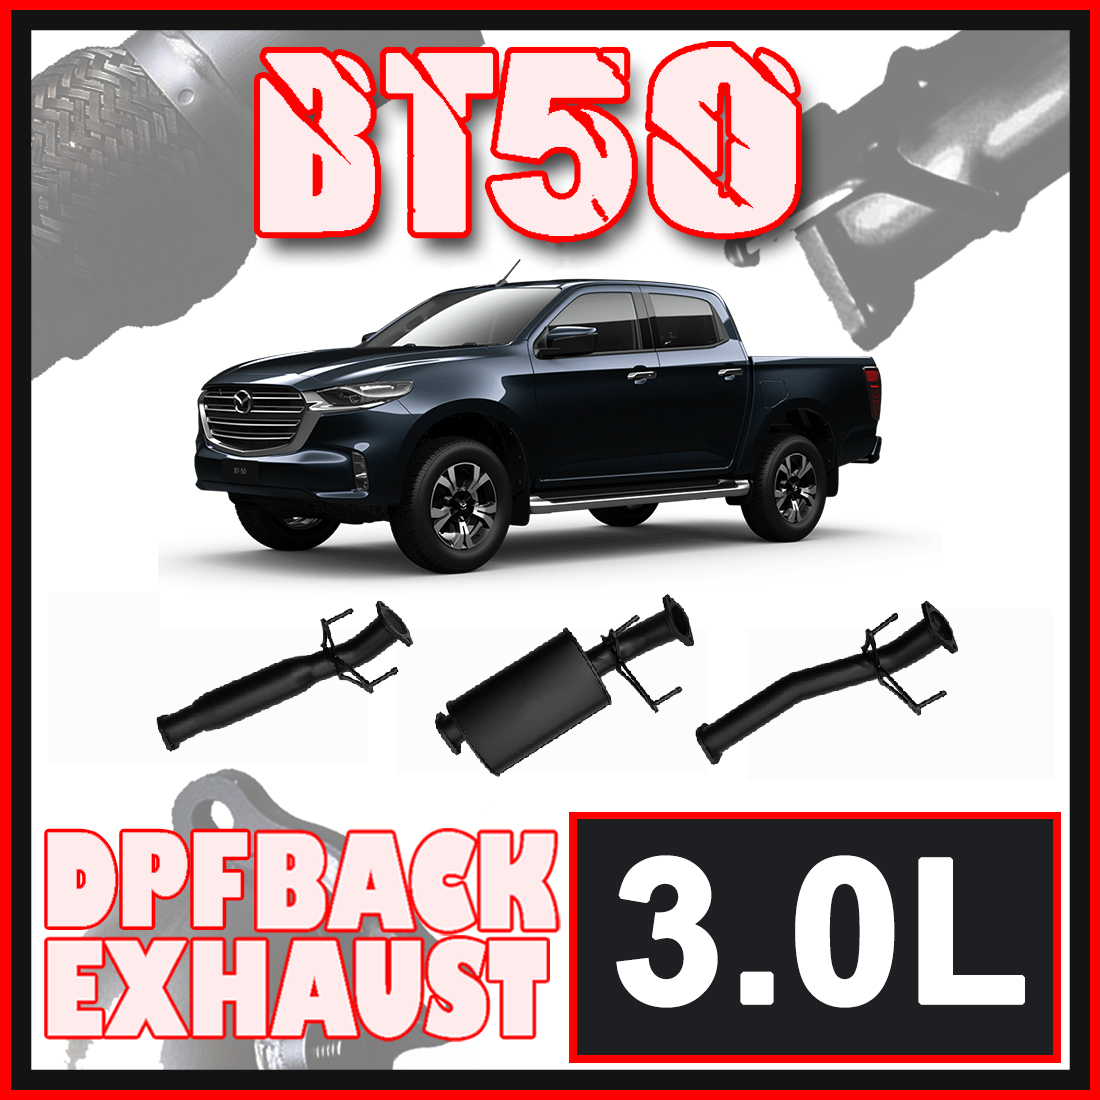 Mazda BT50 Exhaust 3L DPF Back Systems image